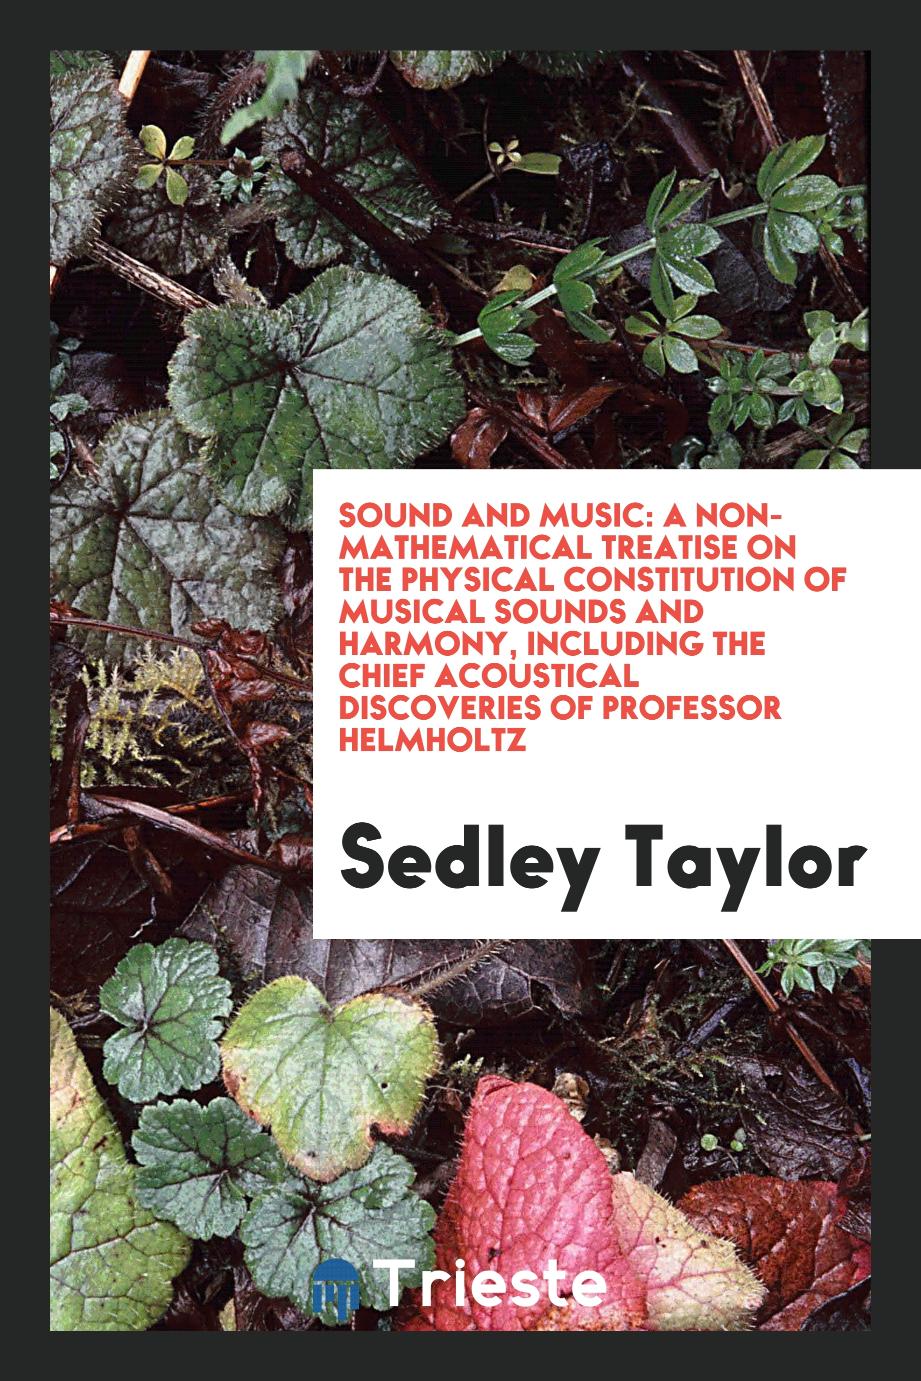 Sound and Music: A Non-Mathematical Treatise on the Physical Constitution of Musical Sounds and Harmony, Including the Chief Acoustical Discoveries of Professor Helmholtz